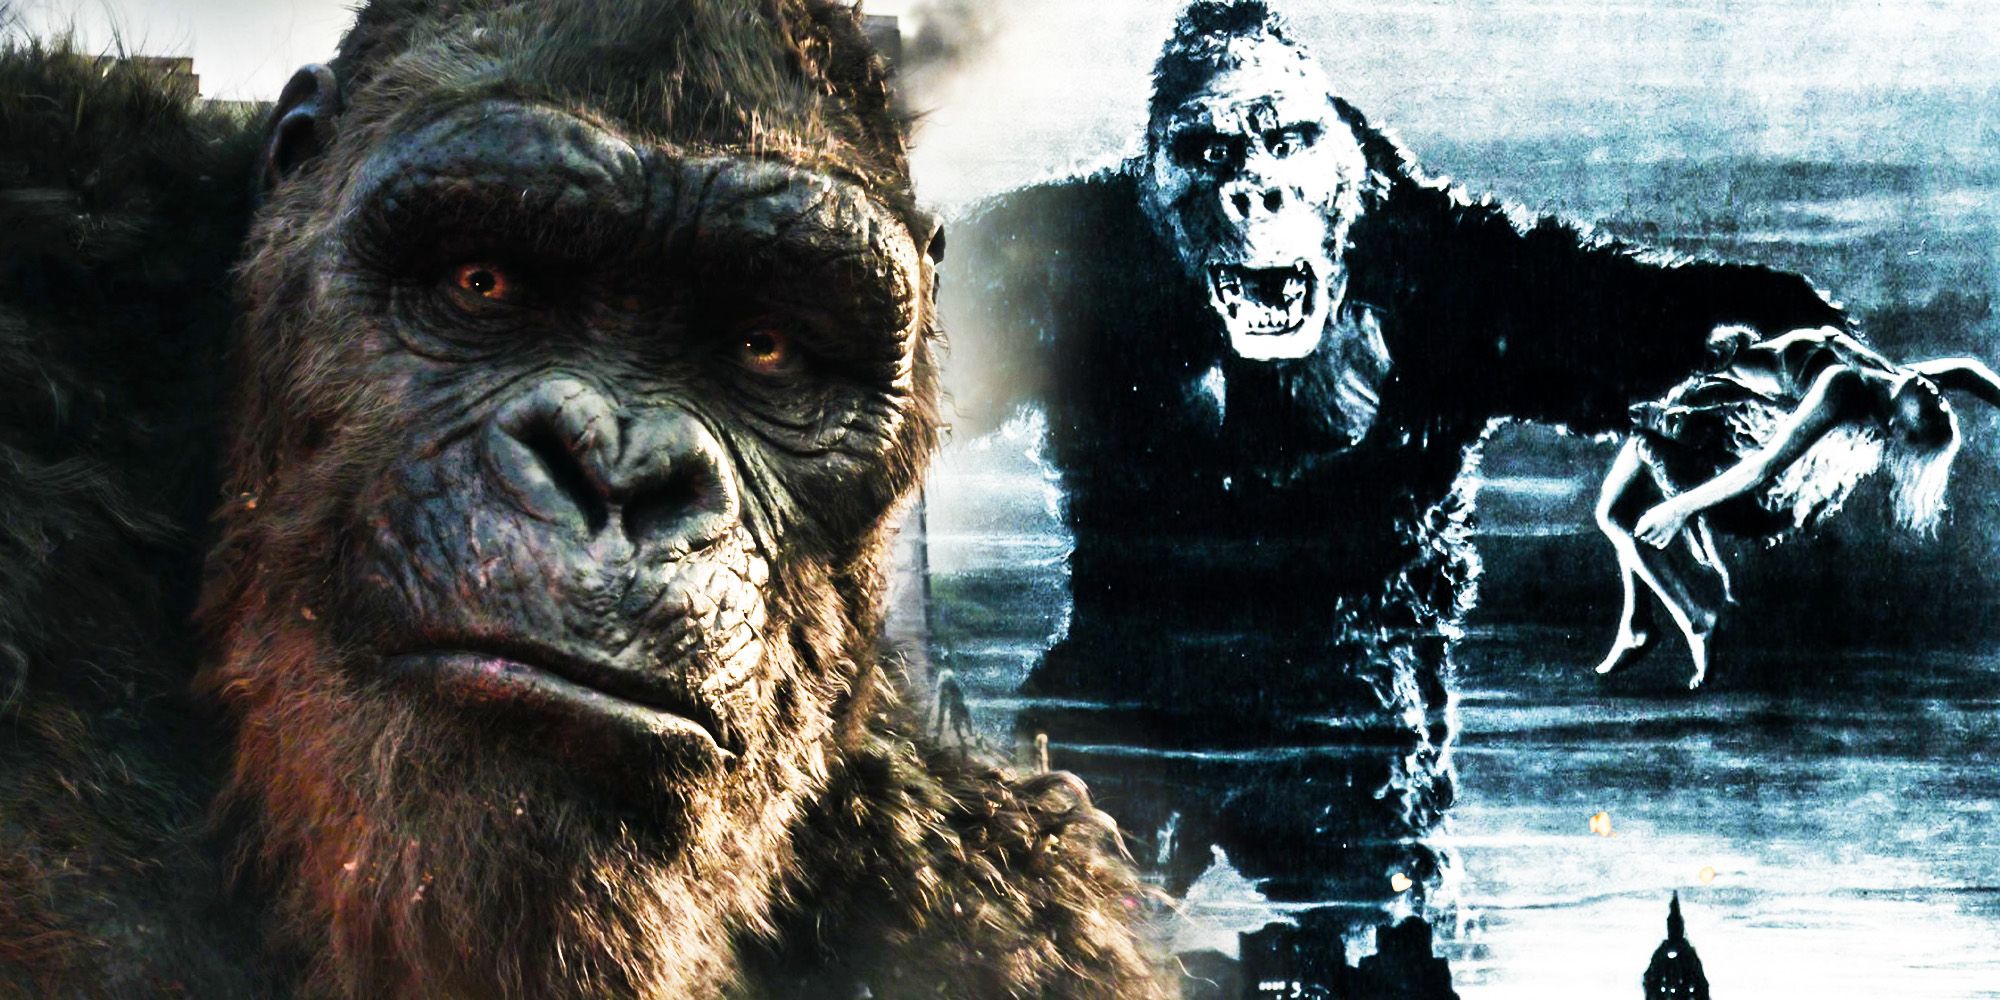 The Return of King Kong: A Journey to 'Scull Island' and Beyond